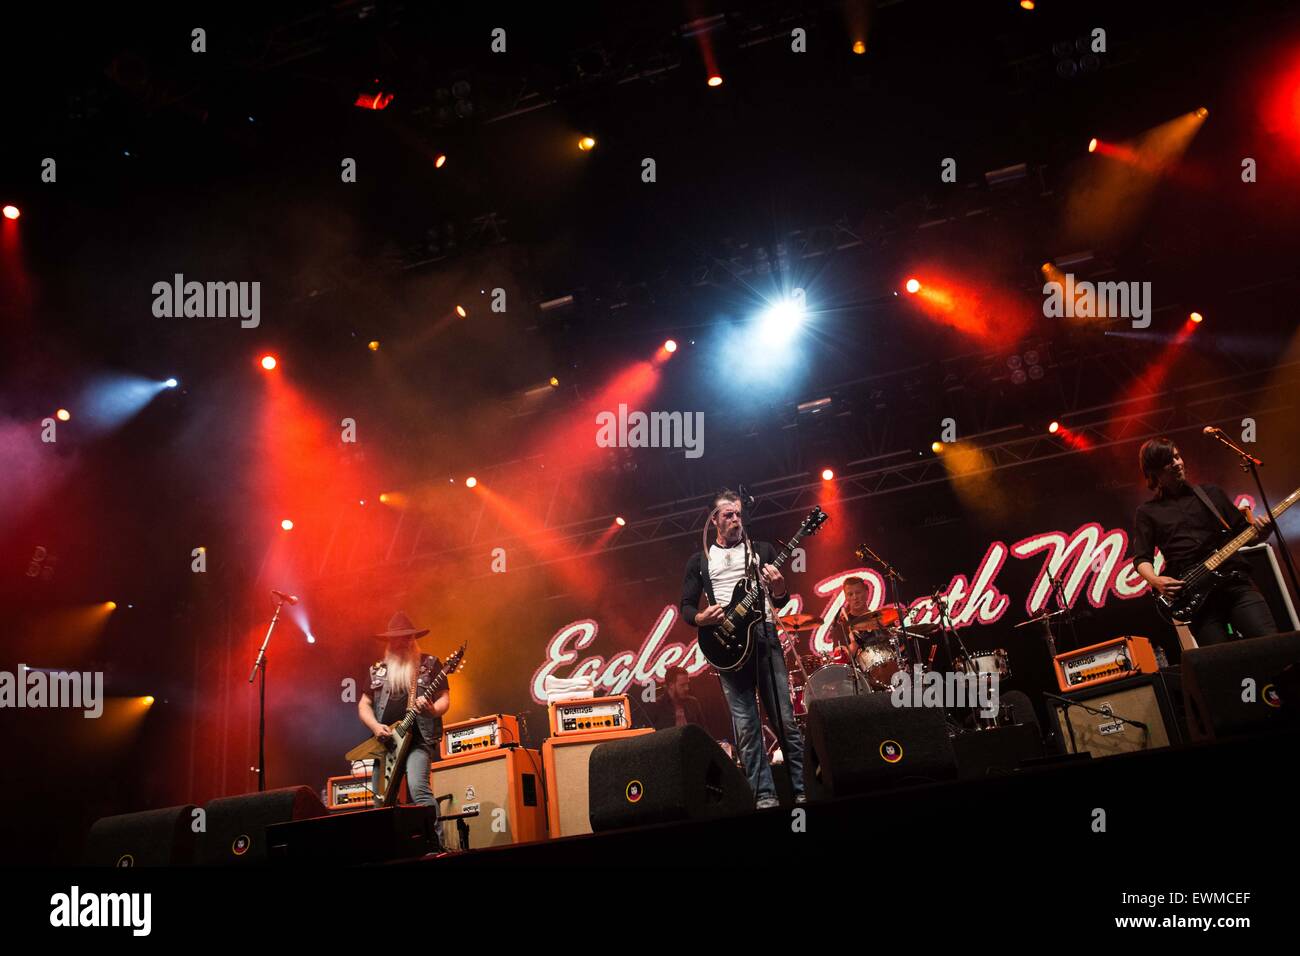 Eagles of Death Metal esegue live at Pinkpop Festival 2015 in Paesi Bassi © Roberto Finizio / Alamy Live News Foto Stock